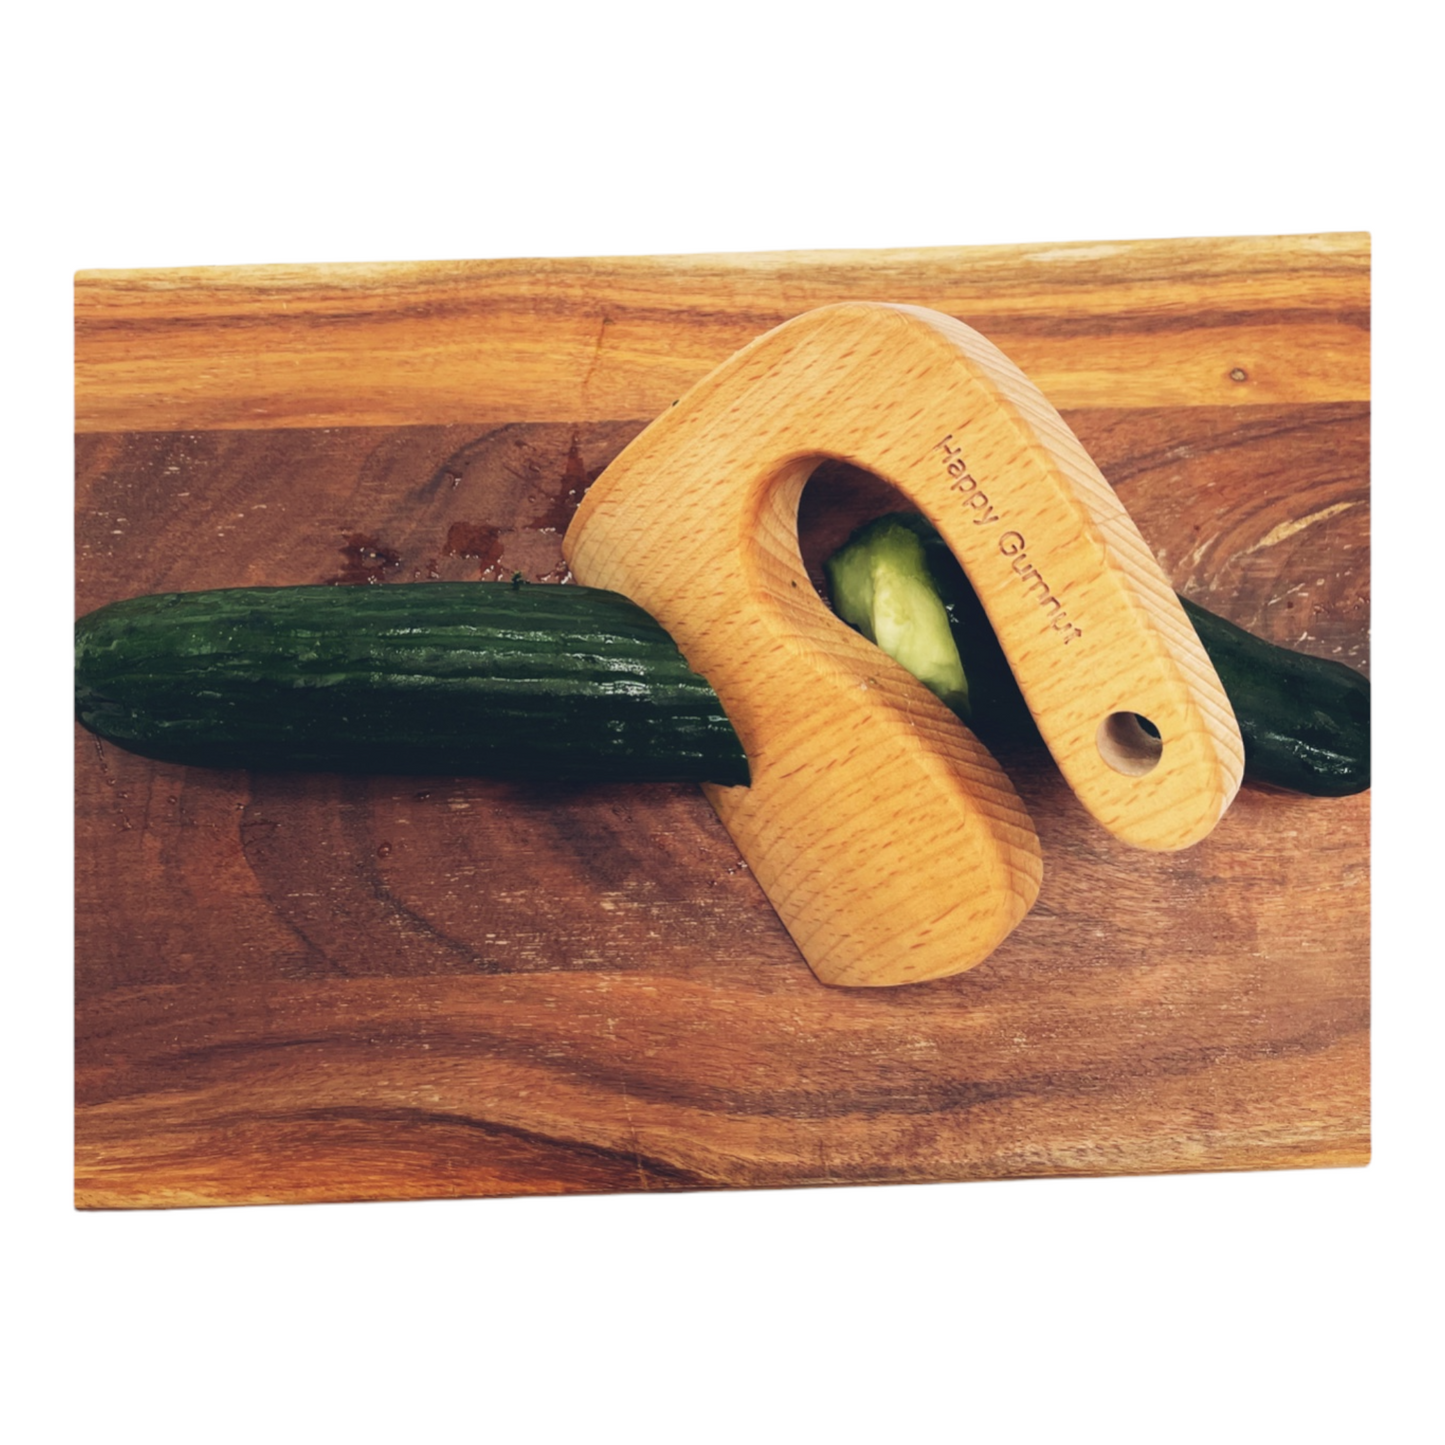 Wooden Cutting Knife Kids Safe Handmade with Natural Wood. - HAPPY GUMNUT